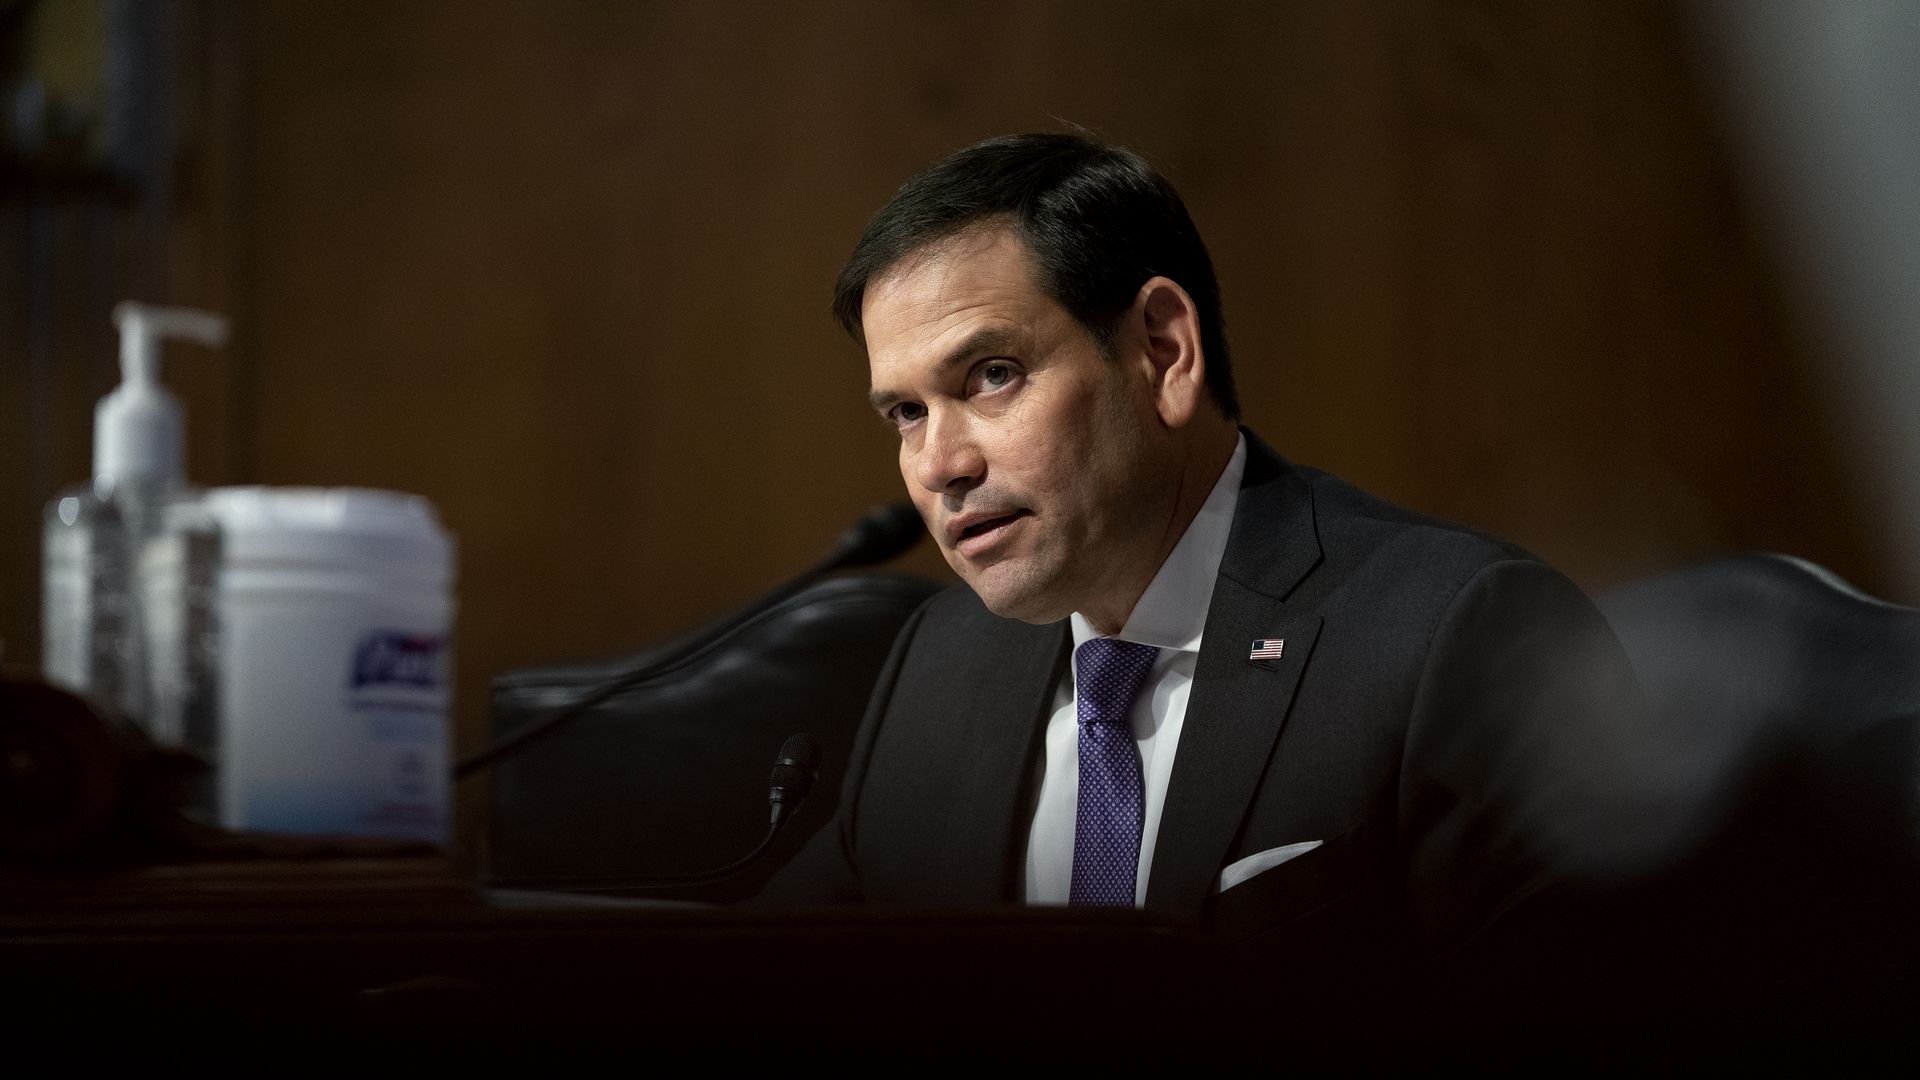   Senator Marco Rubio (R-FL) speaks during a Senate Appropriations Subcommittee hearing May 26